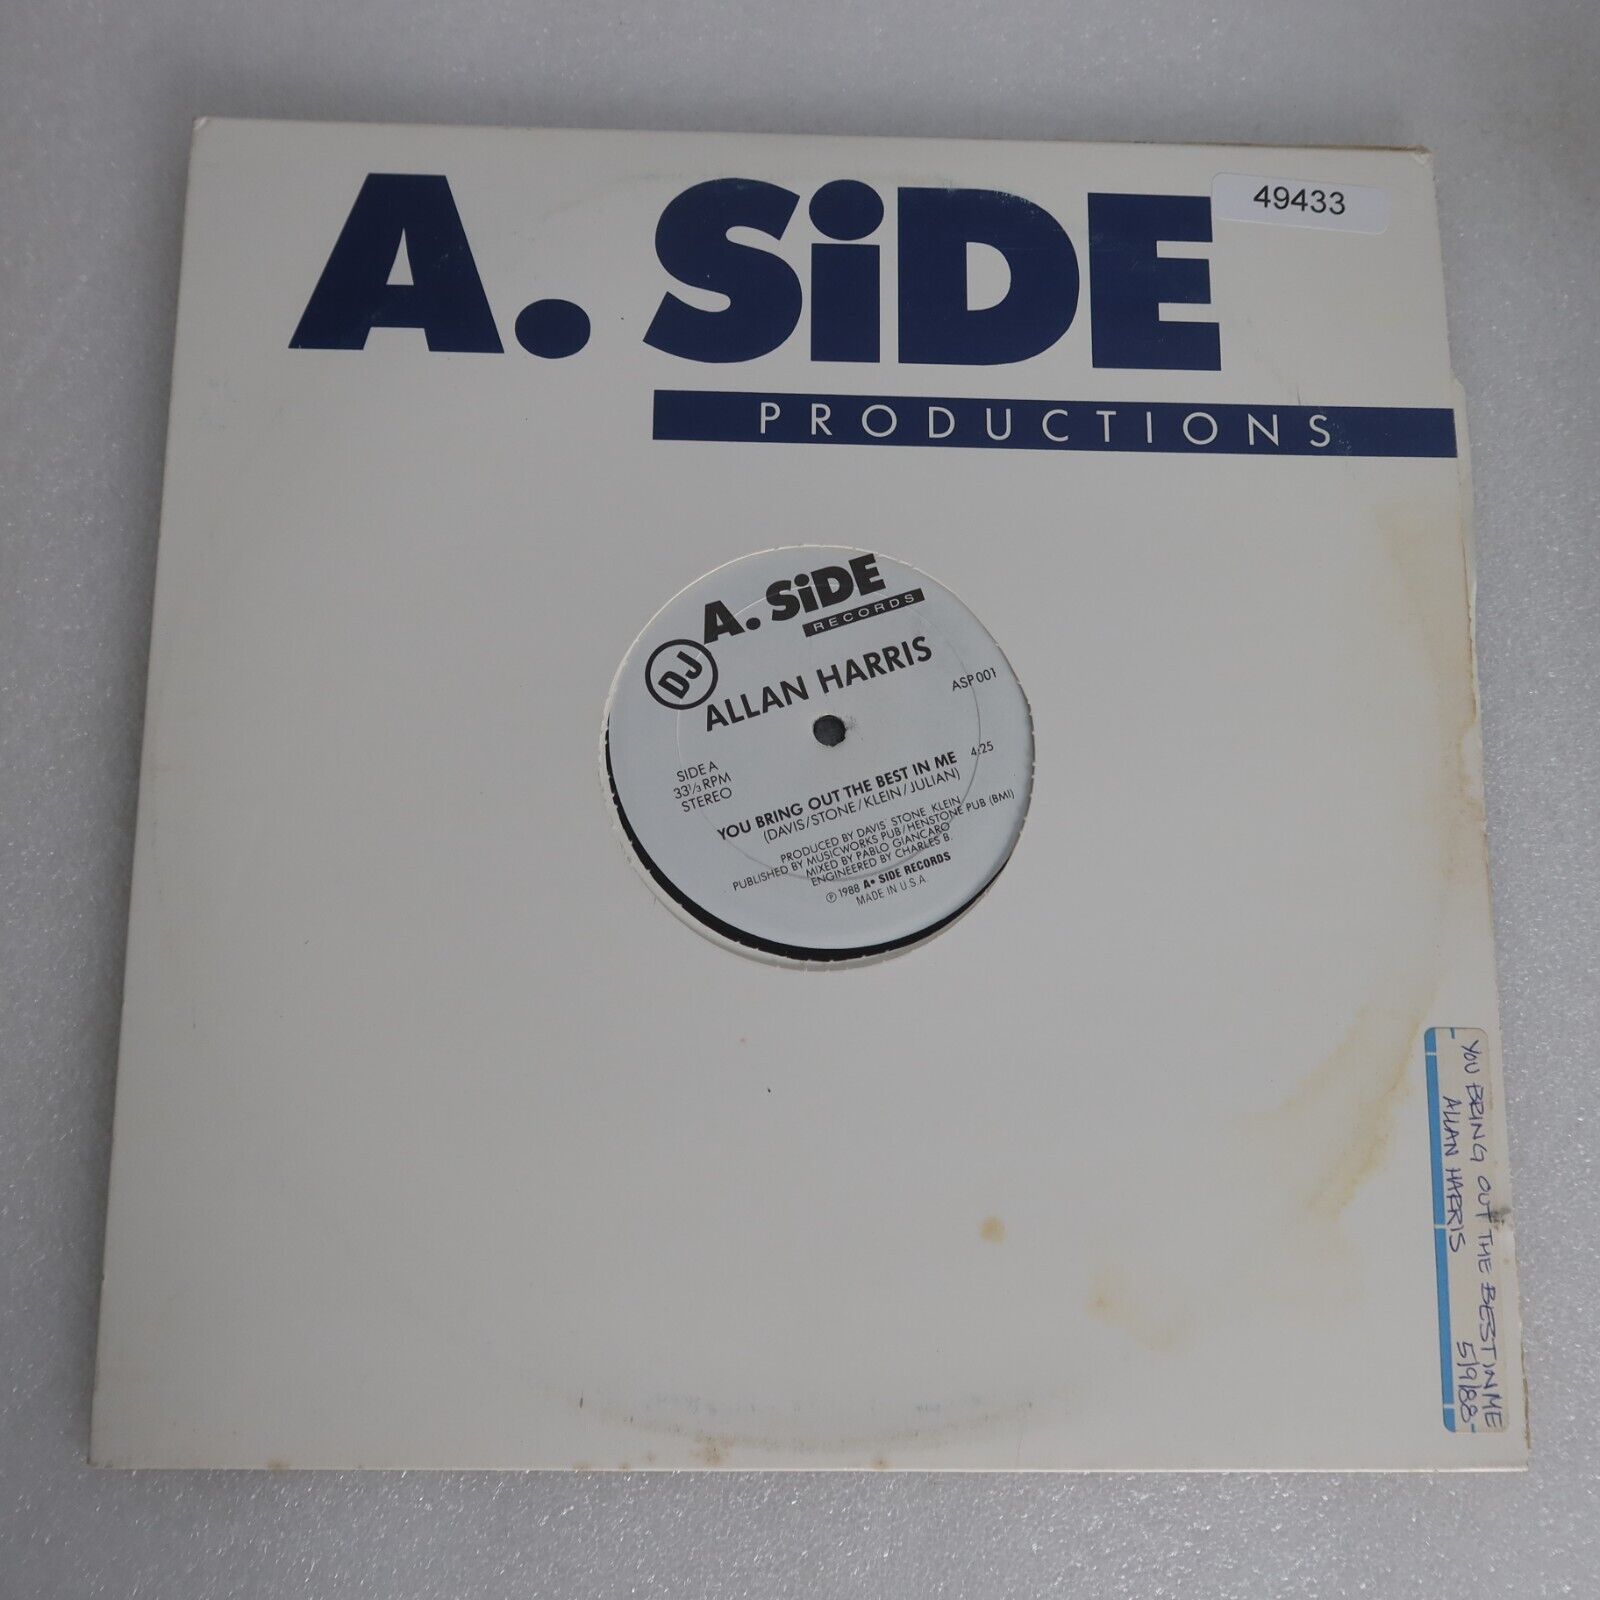 Allan Harris You Bring Out The Best In Me PROMO SINGLE Vinyl Record Album